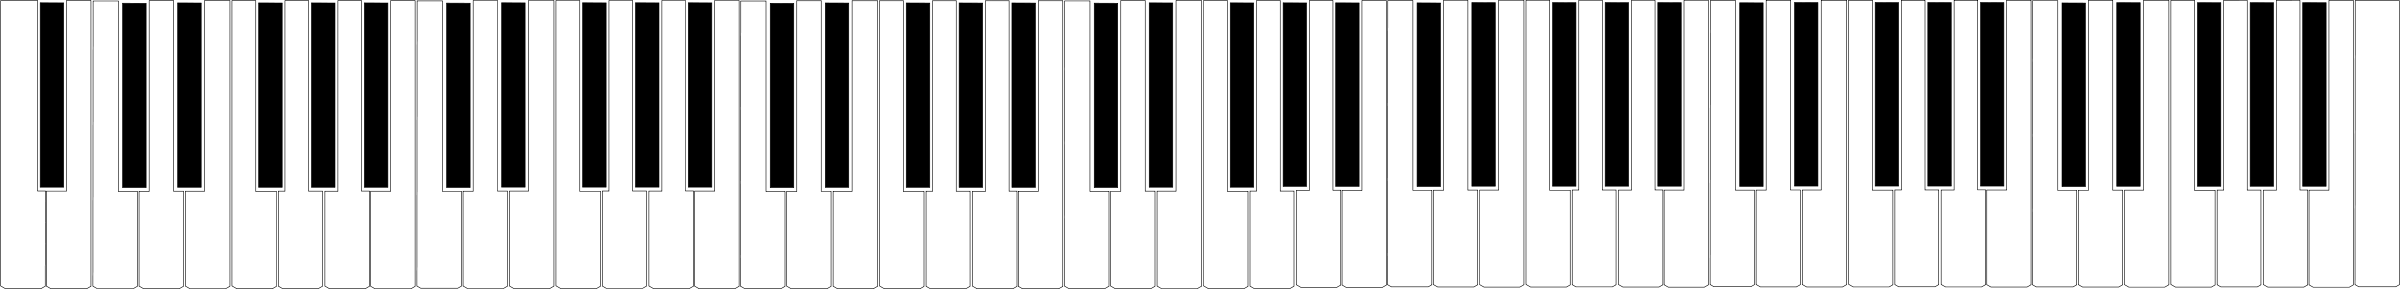 Art Piano Keys Free Cliparts That You Can Download To You Computer